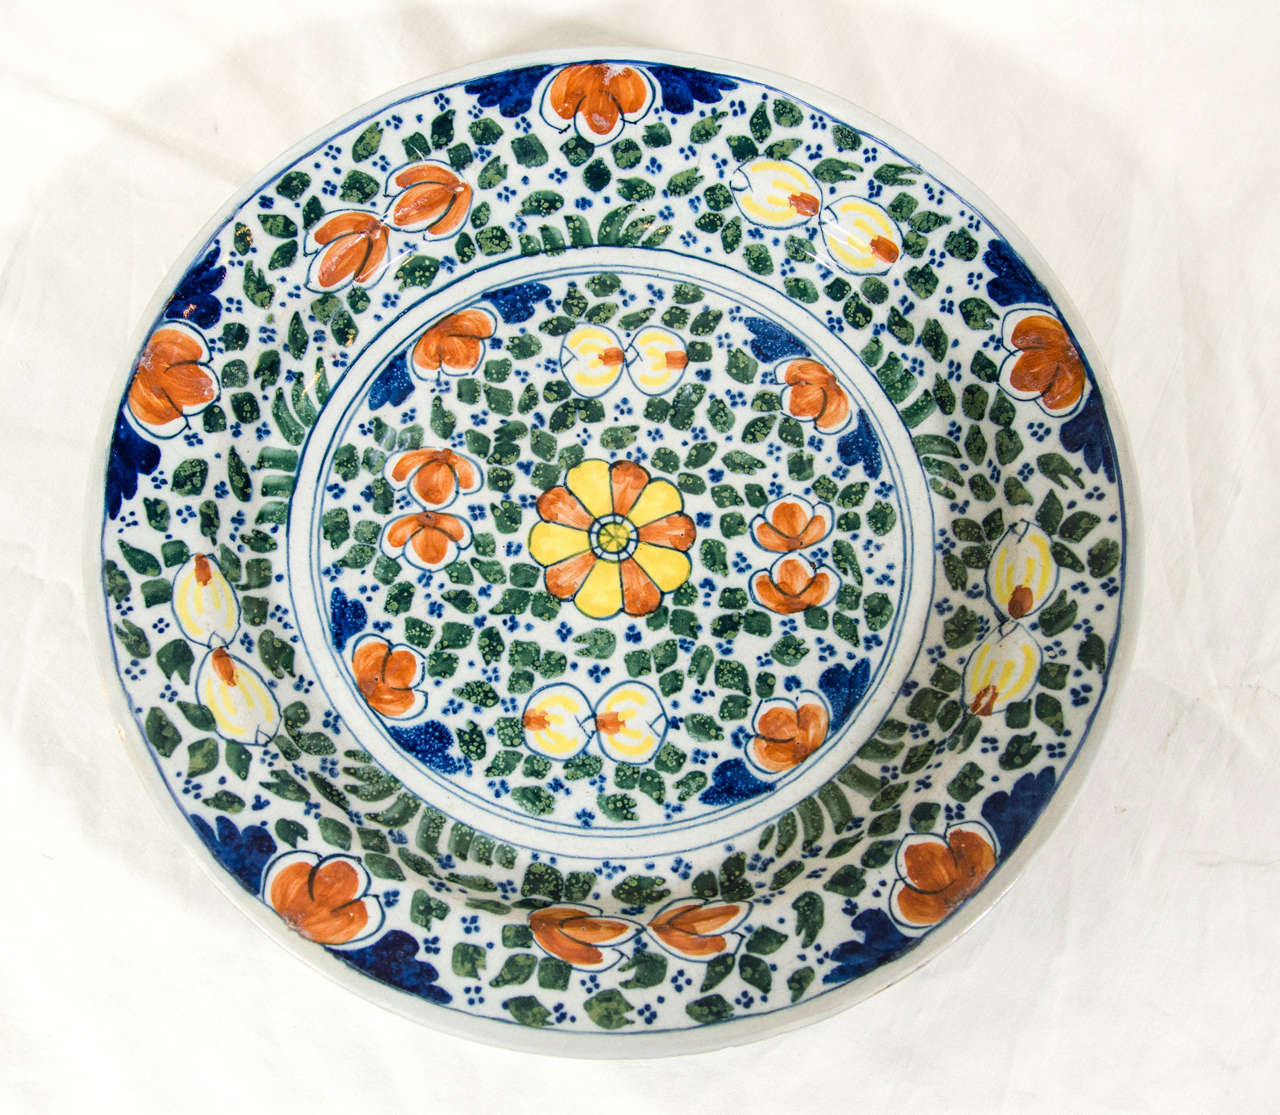 A Dutch delft charger decorated all-over with a lively design of leaves and flowers painted in green, yellow, orange and blue.